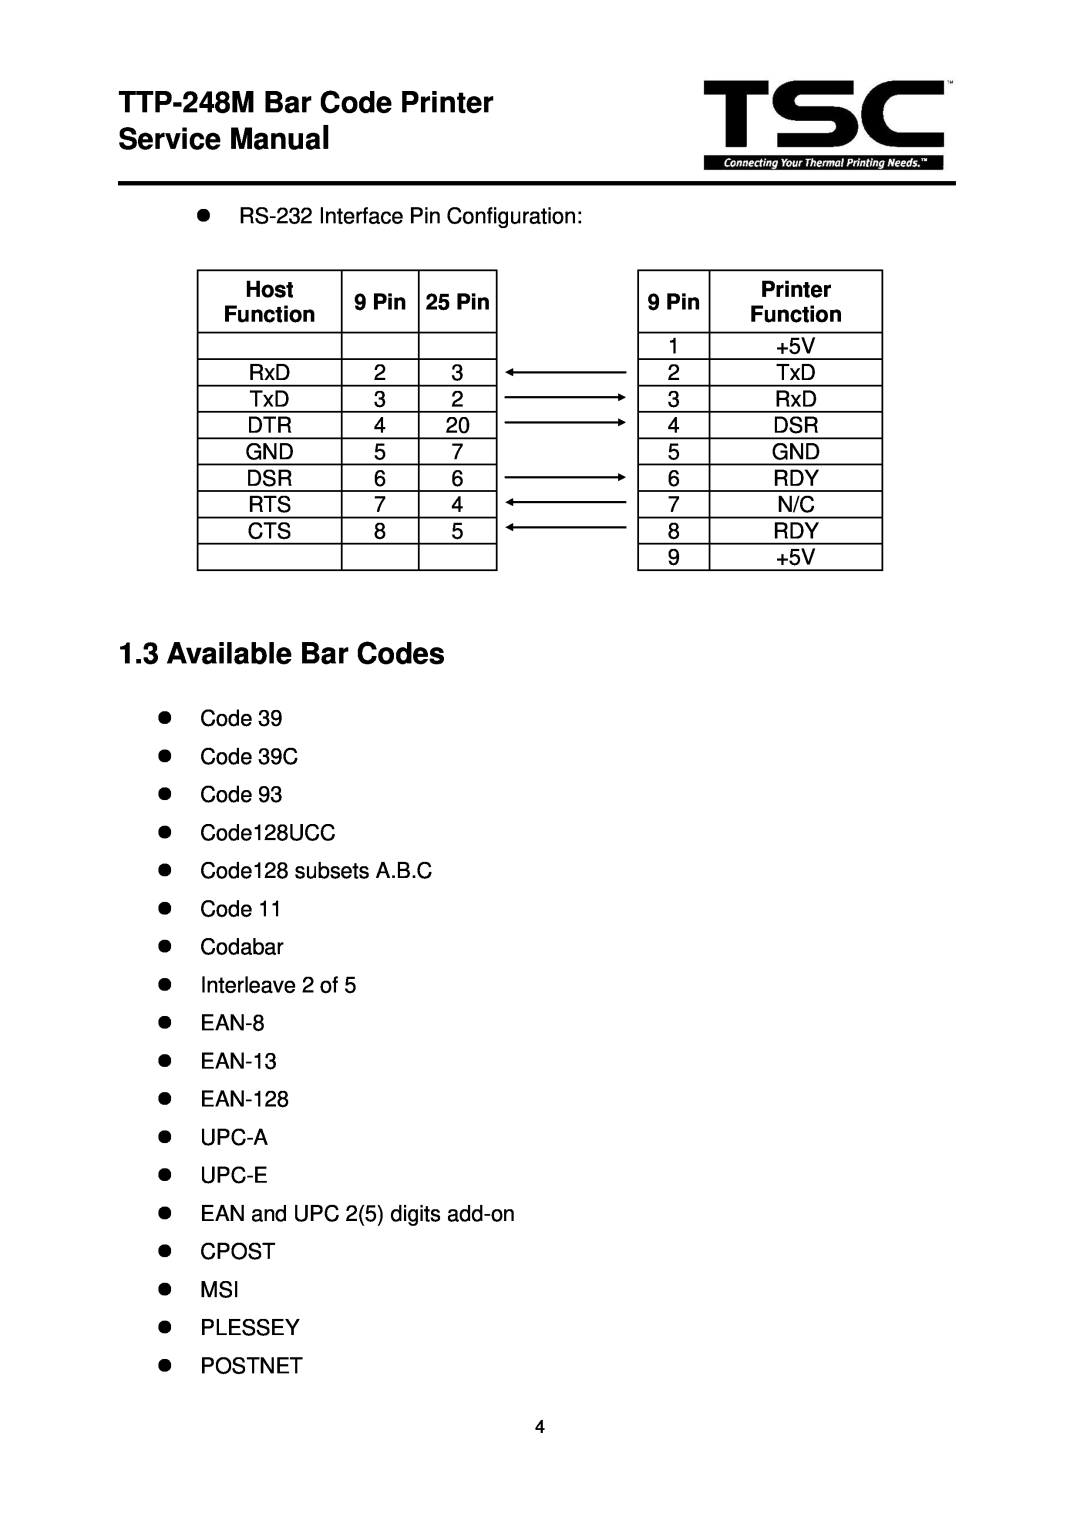 The Speaker Company TTP 248M service manual Available Bar Codes, Host, 9 Pin, 25 Pin, Function, Printer 